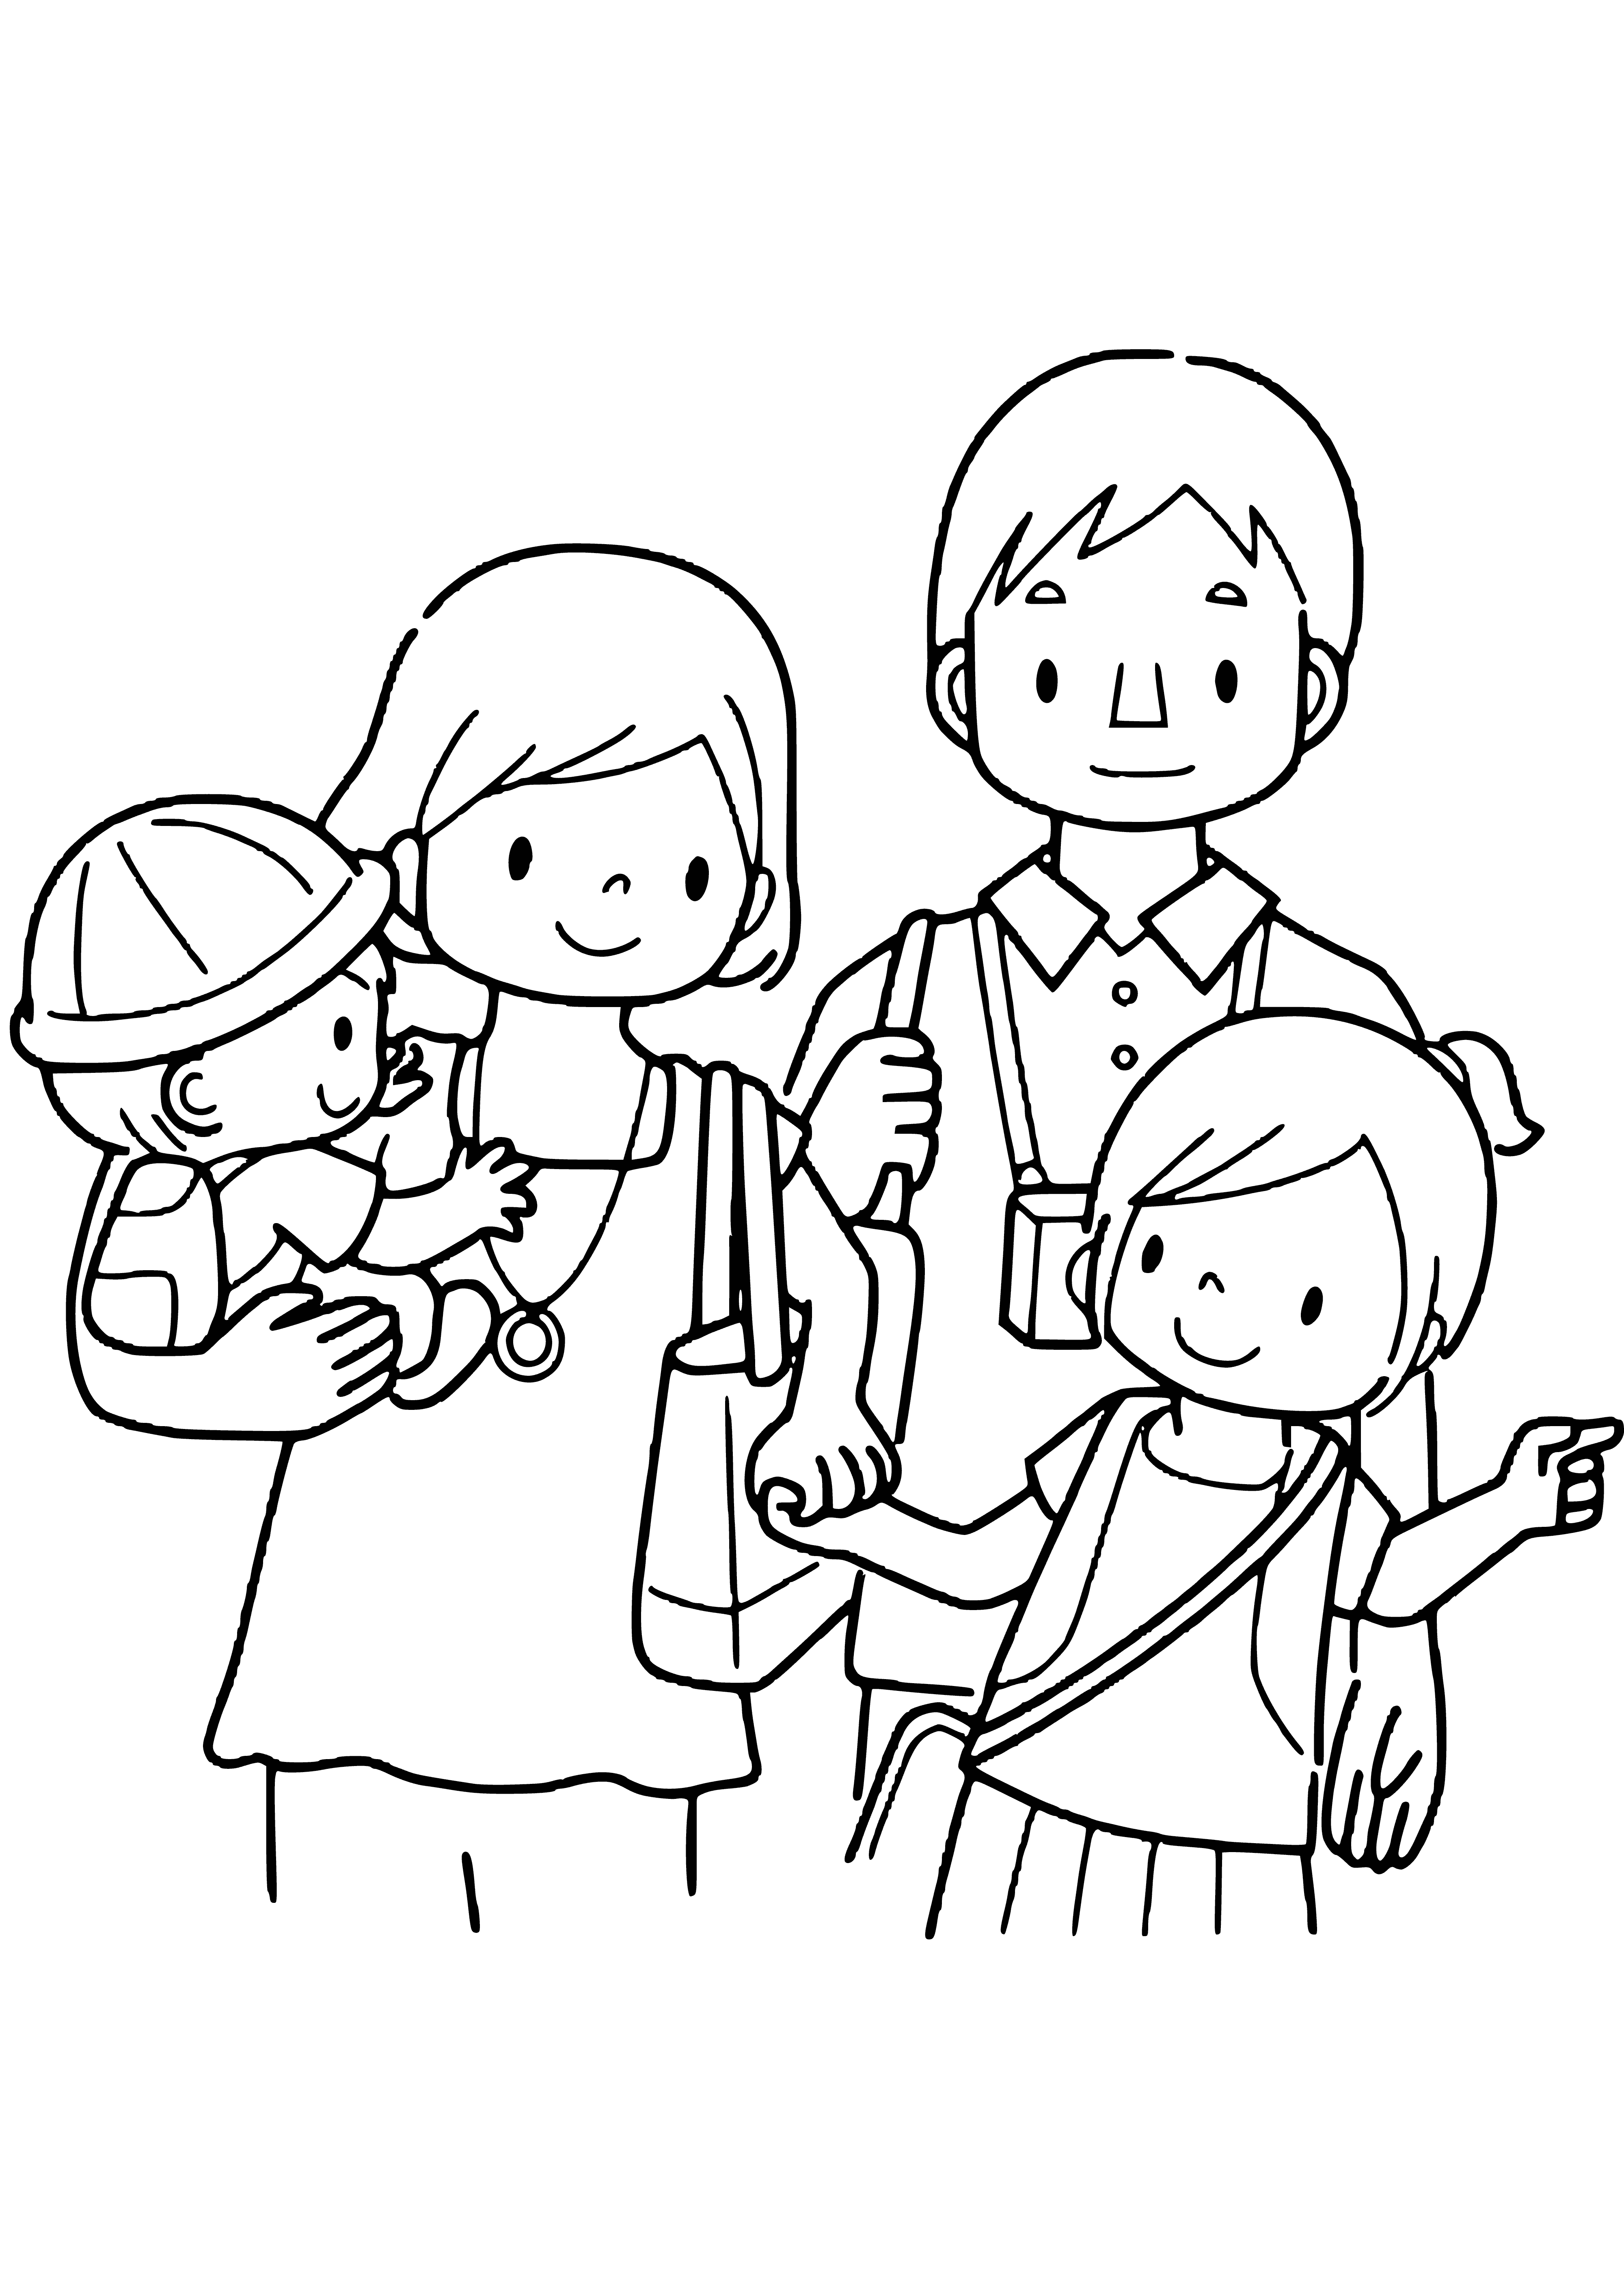 coloring page: Family of four enjoying a day at the park. The father holds a book, mom a baby, & the other child plays with a toy.